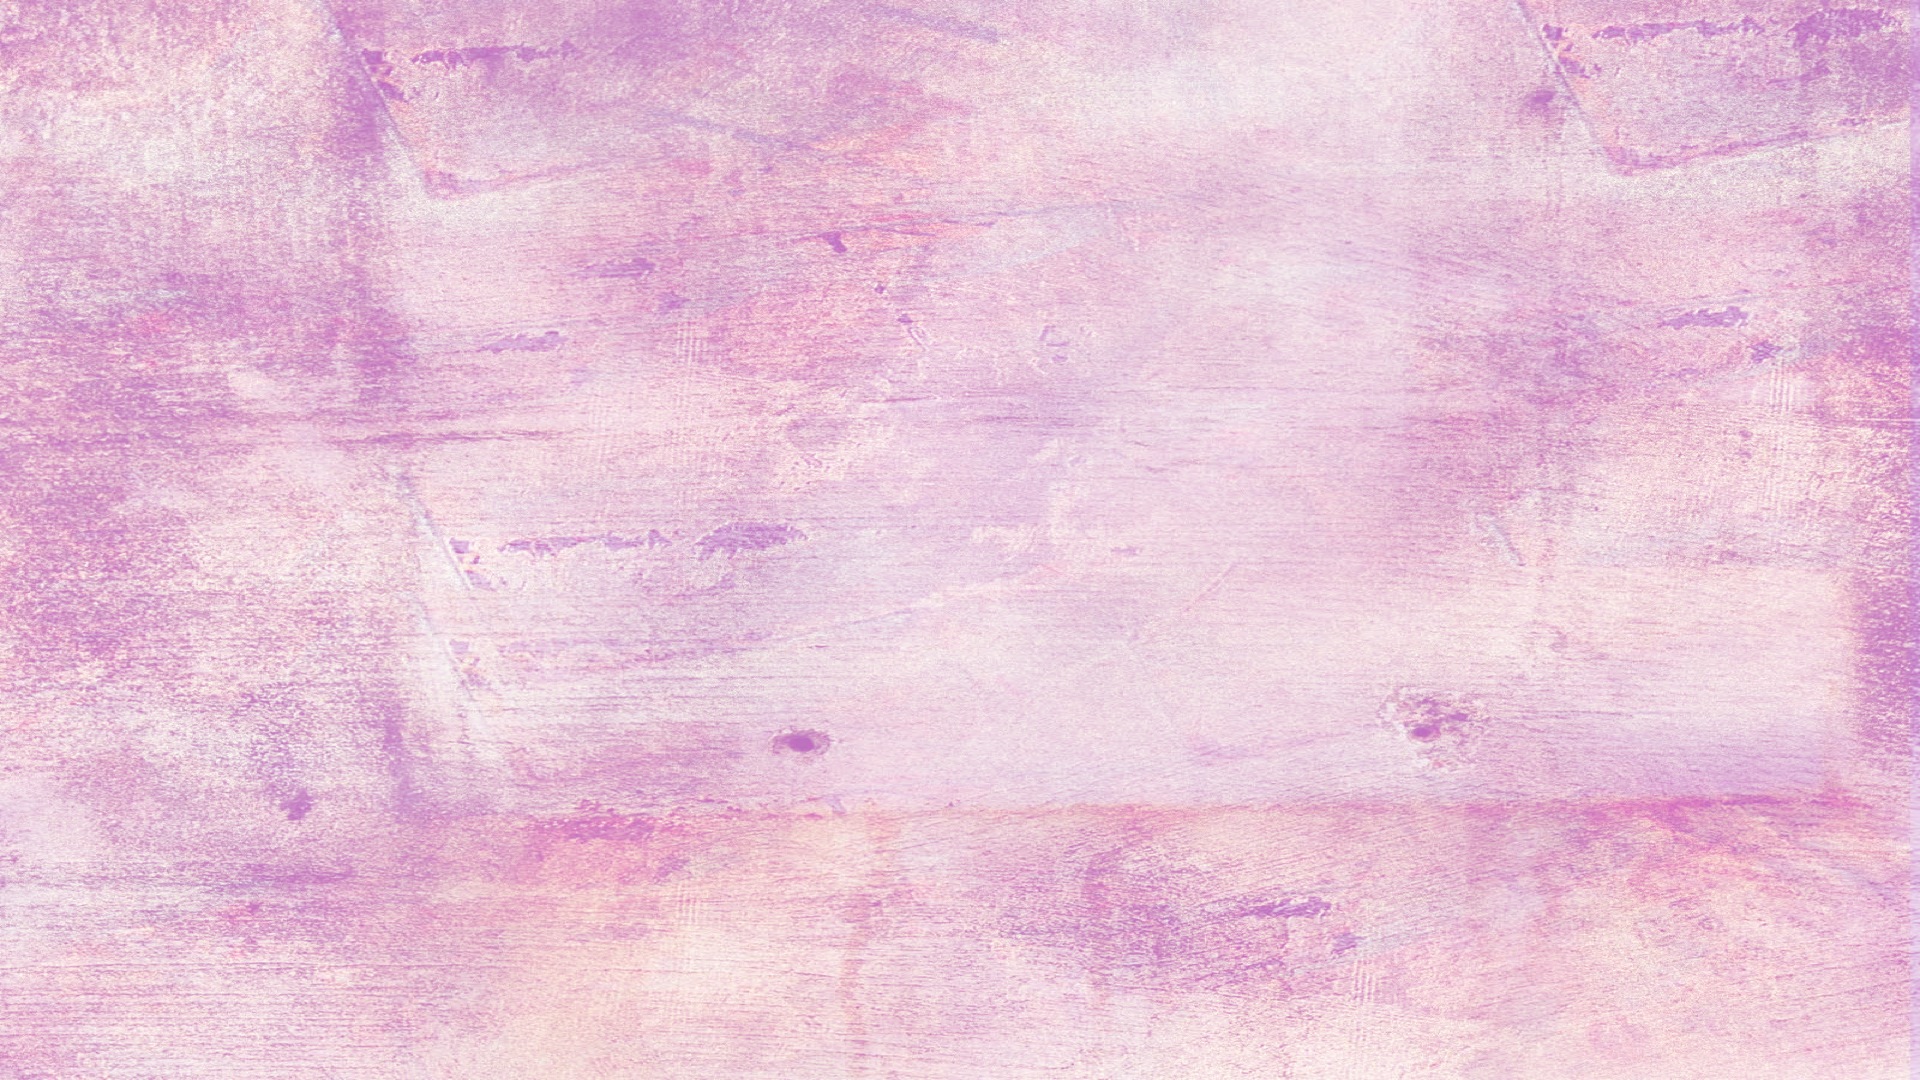 Light Purple Backgrounds Images amp Pictures Becuo